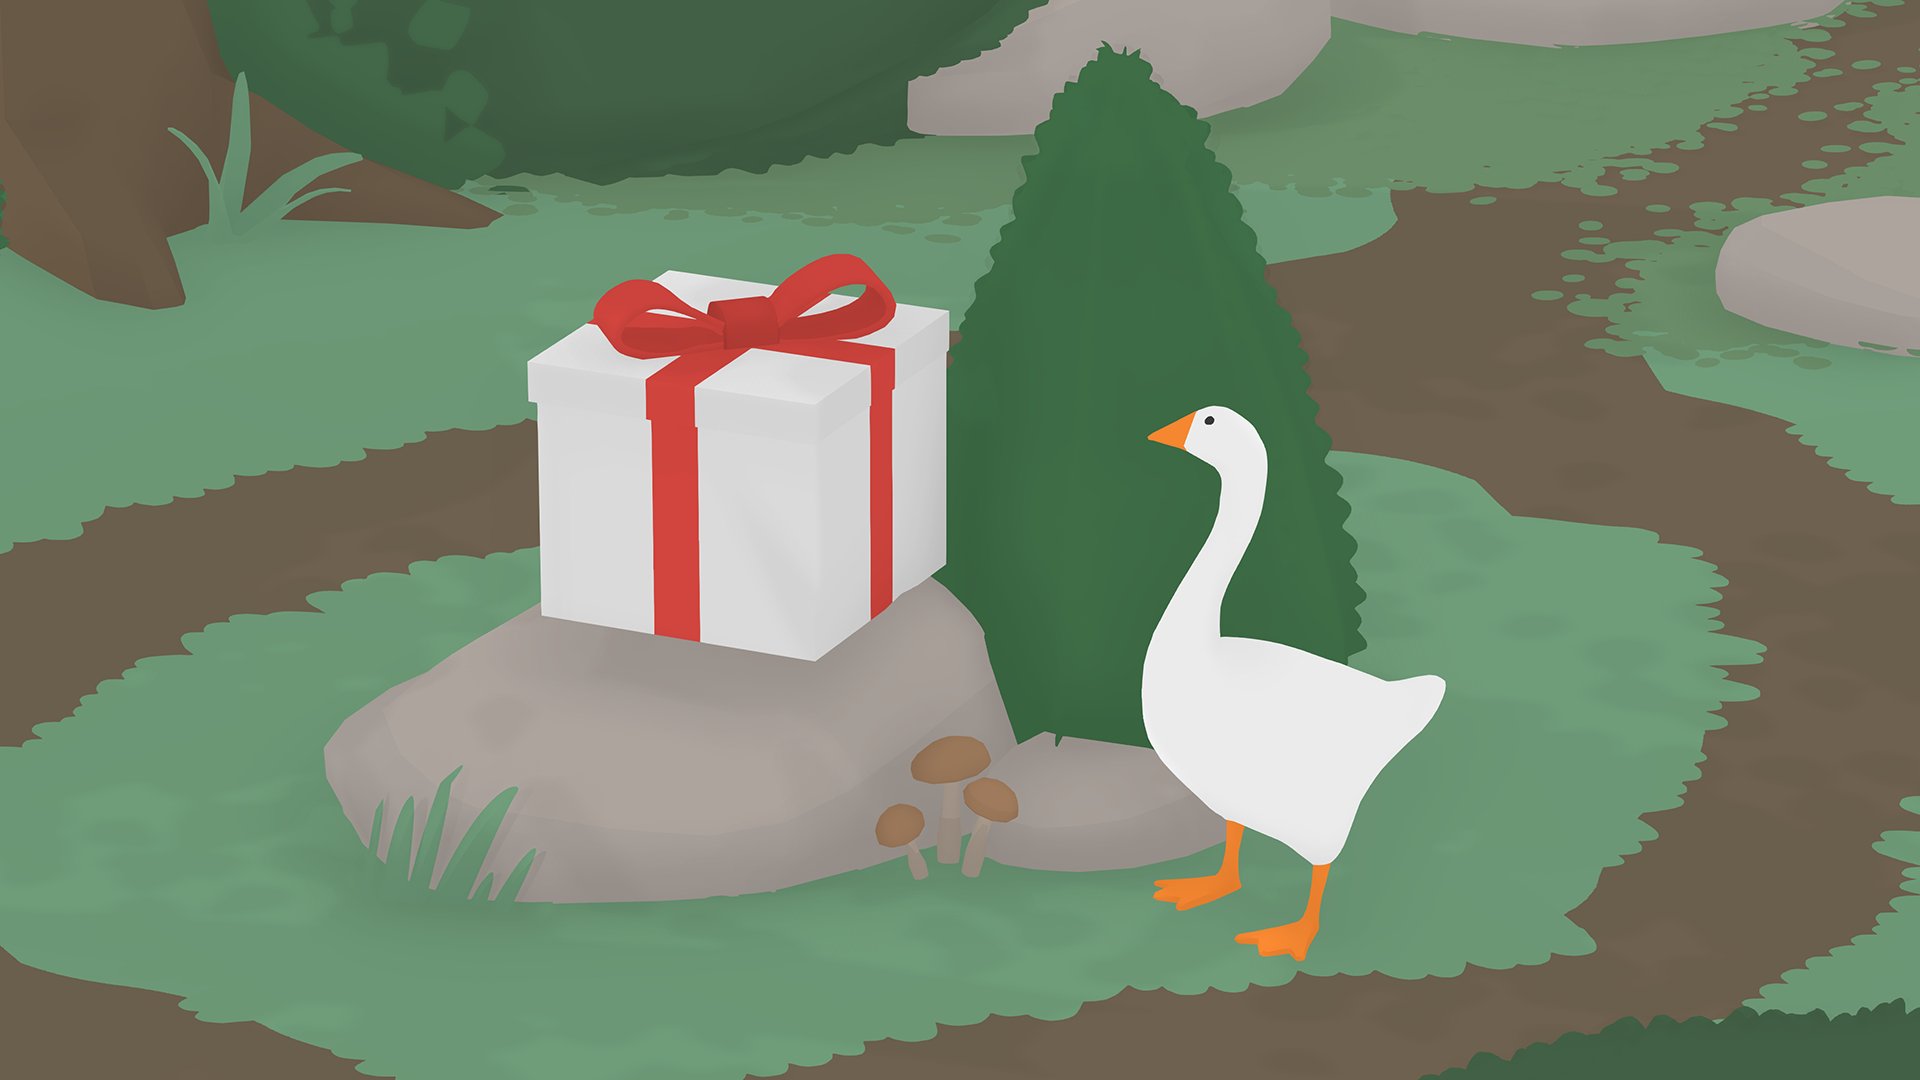 Untitled Goose Game nabs Game of the Year at the 2020 Game